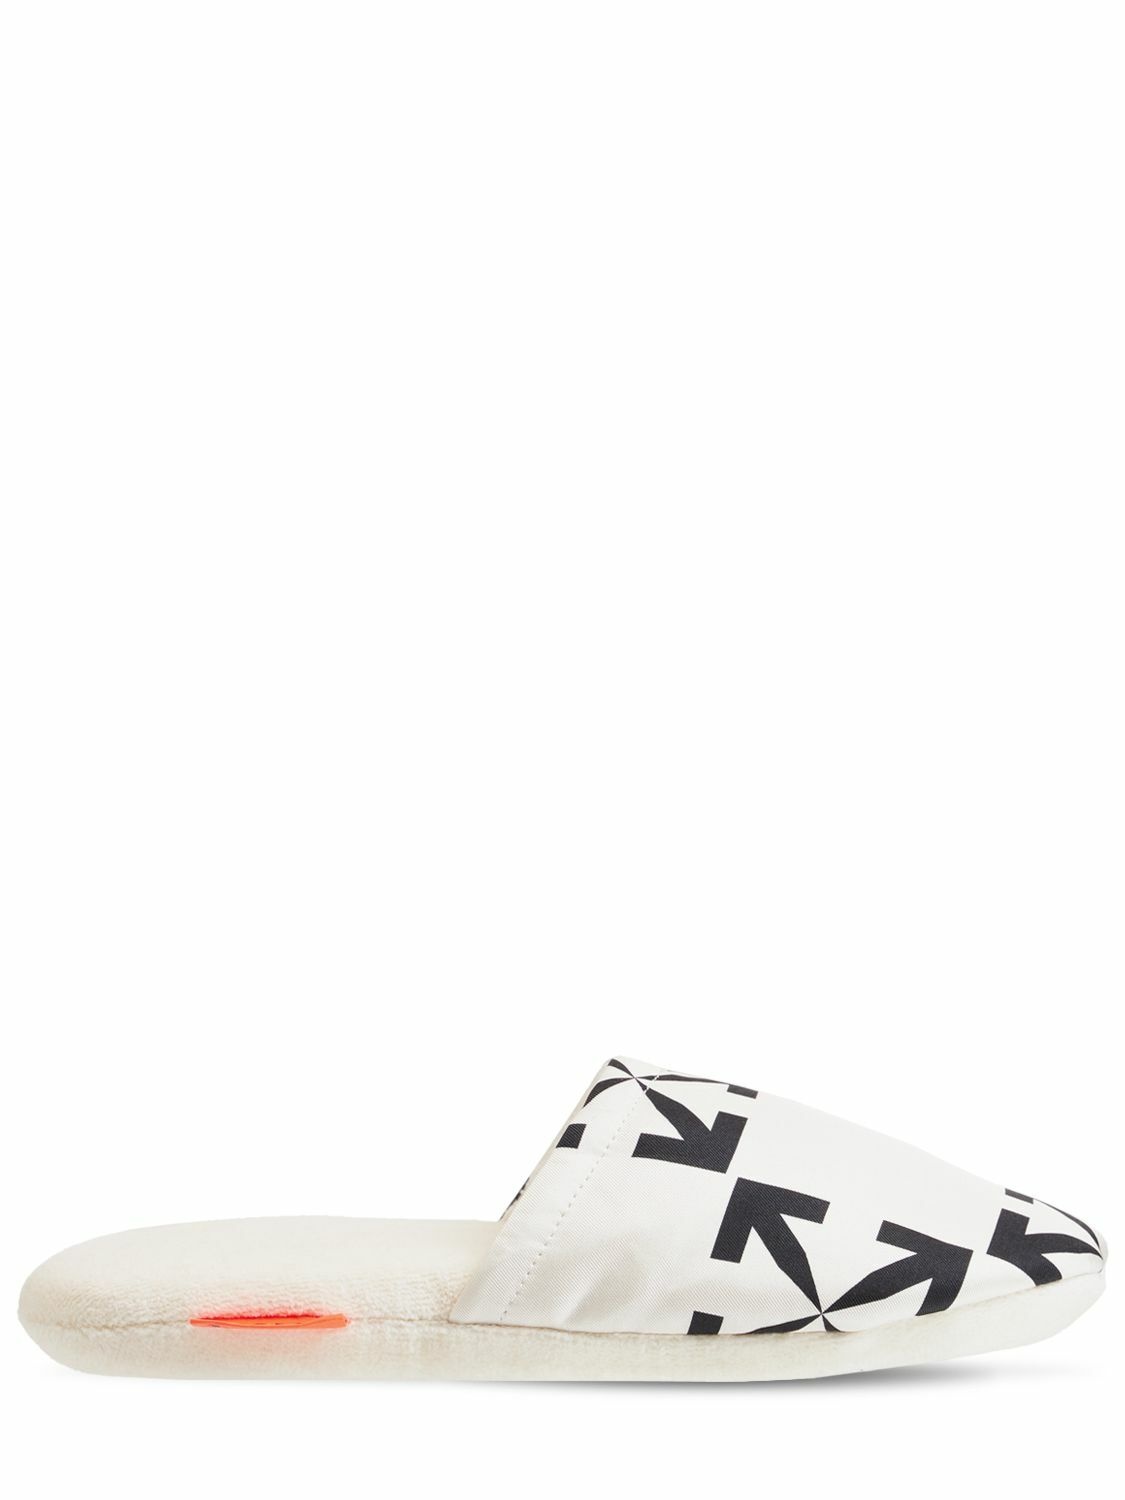 Photo: OFF-WHITE - Arrow Pattern Slippers